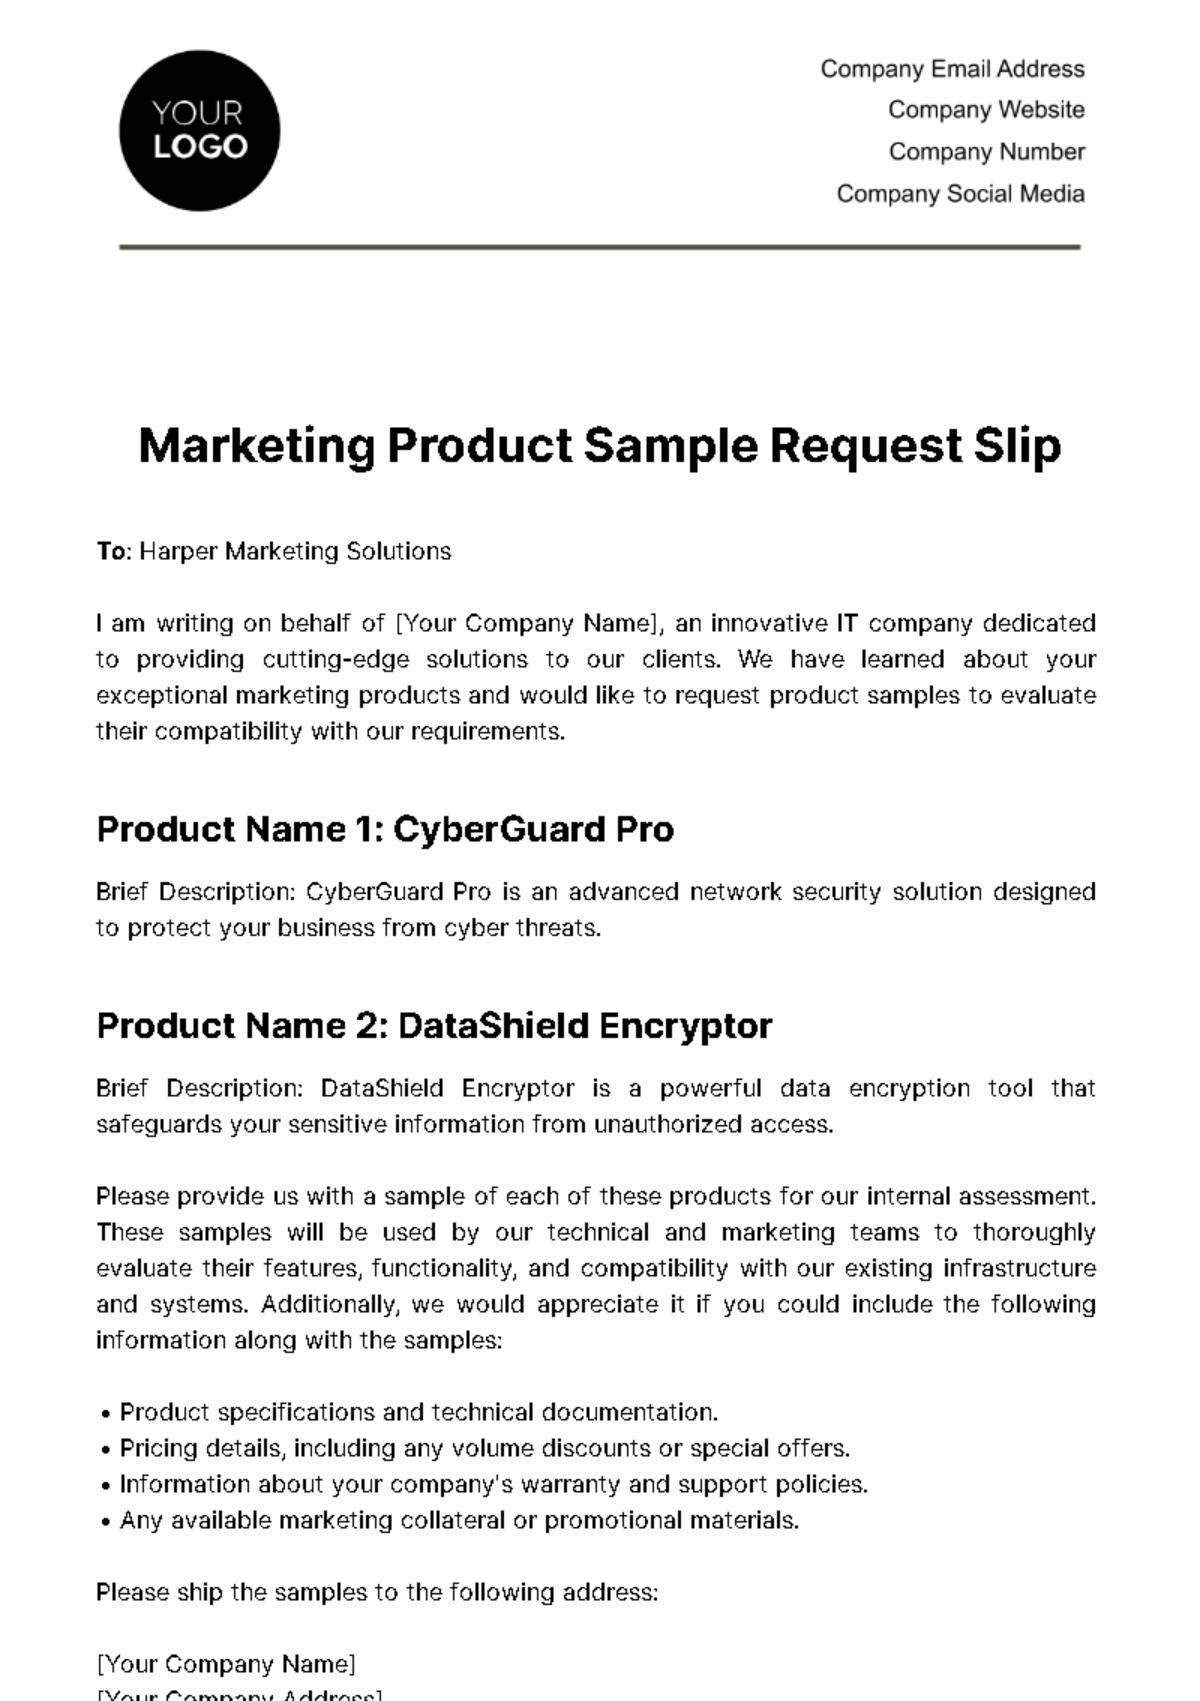 Free Marketing Product Sample Request Slip Template